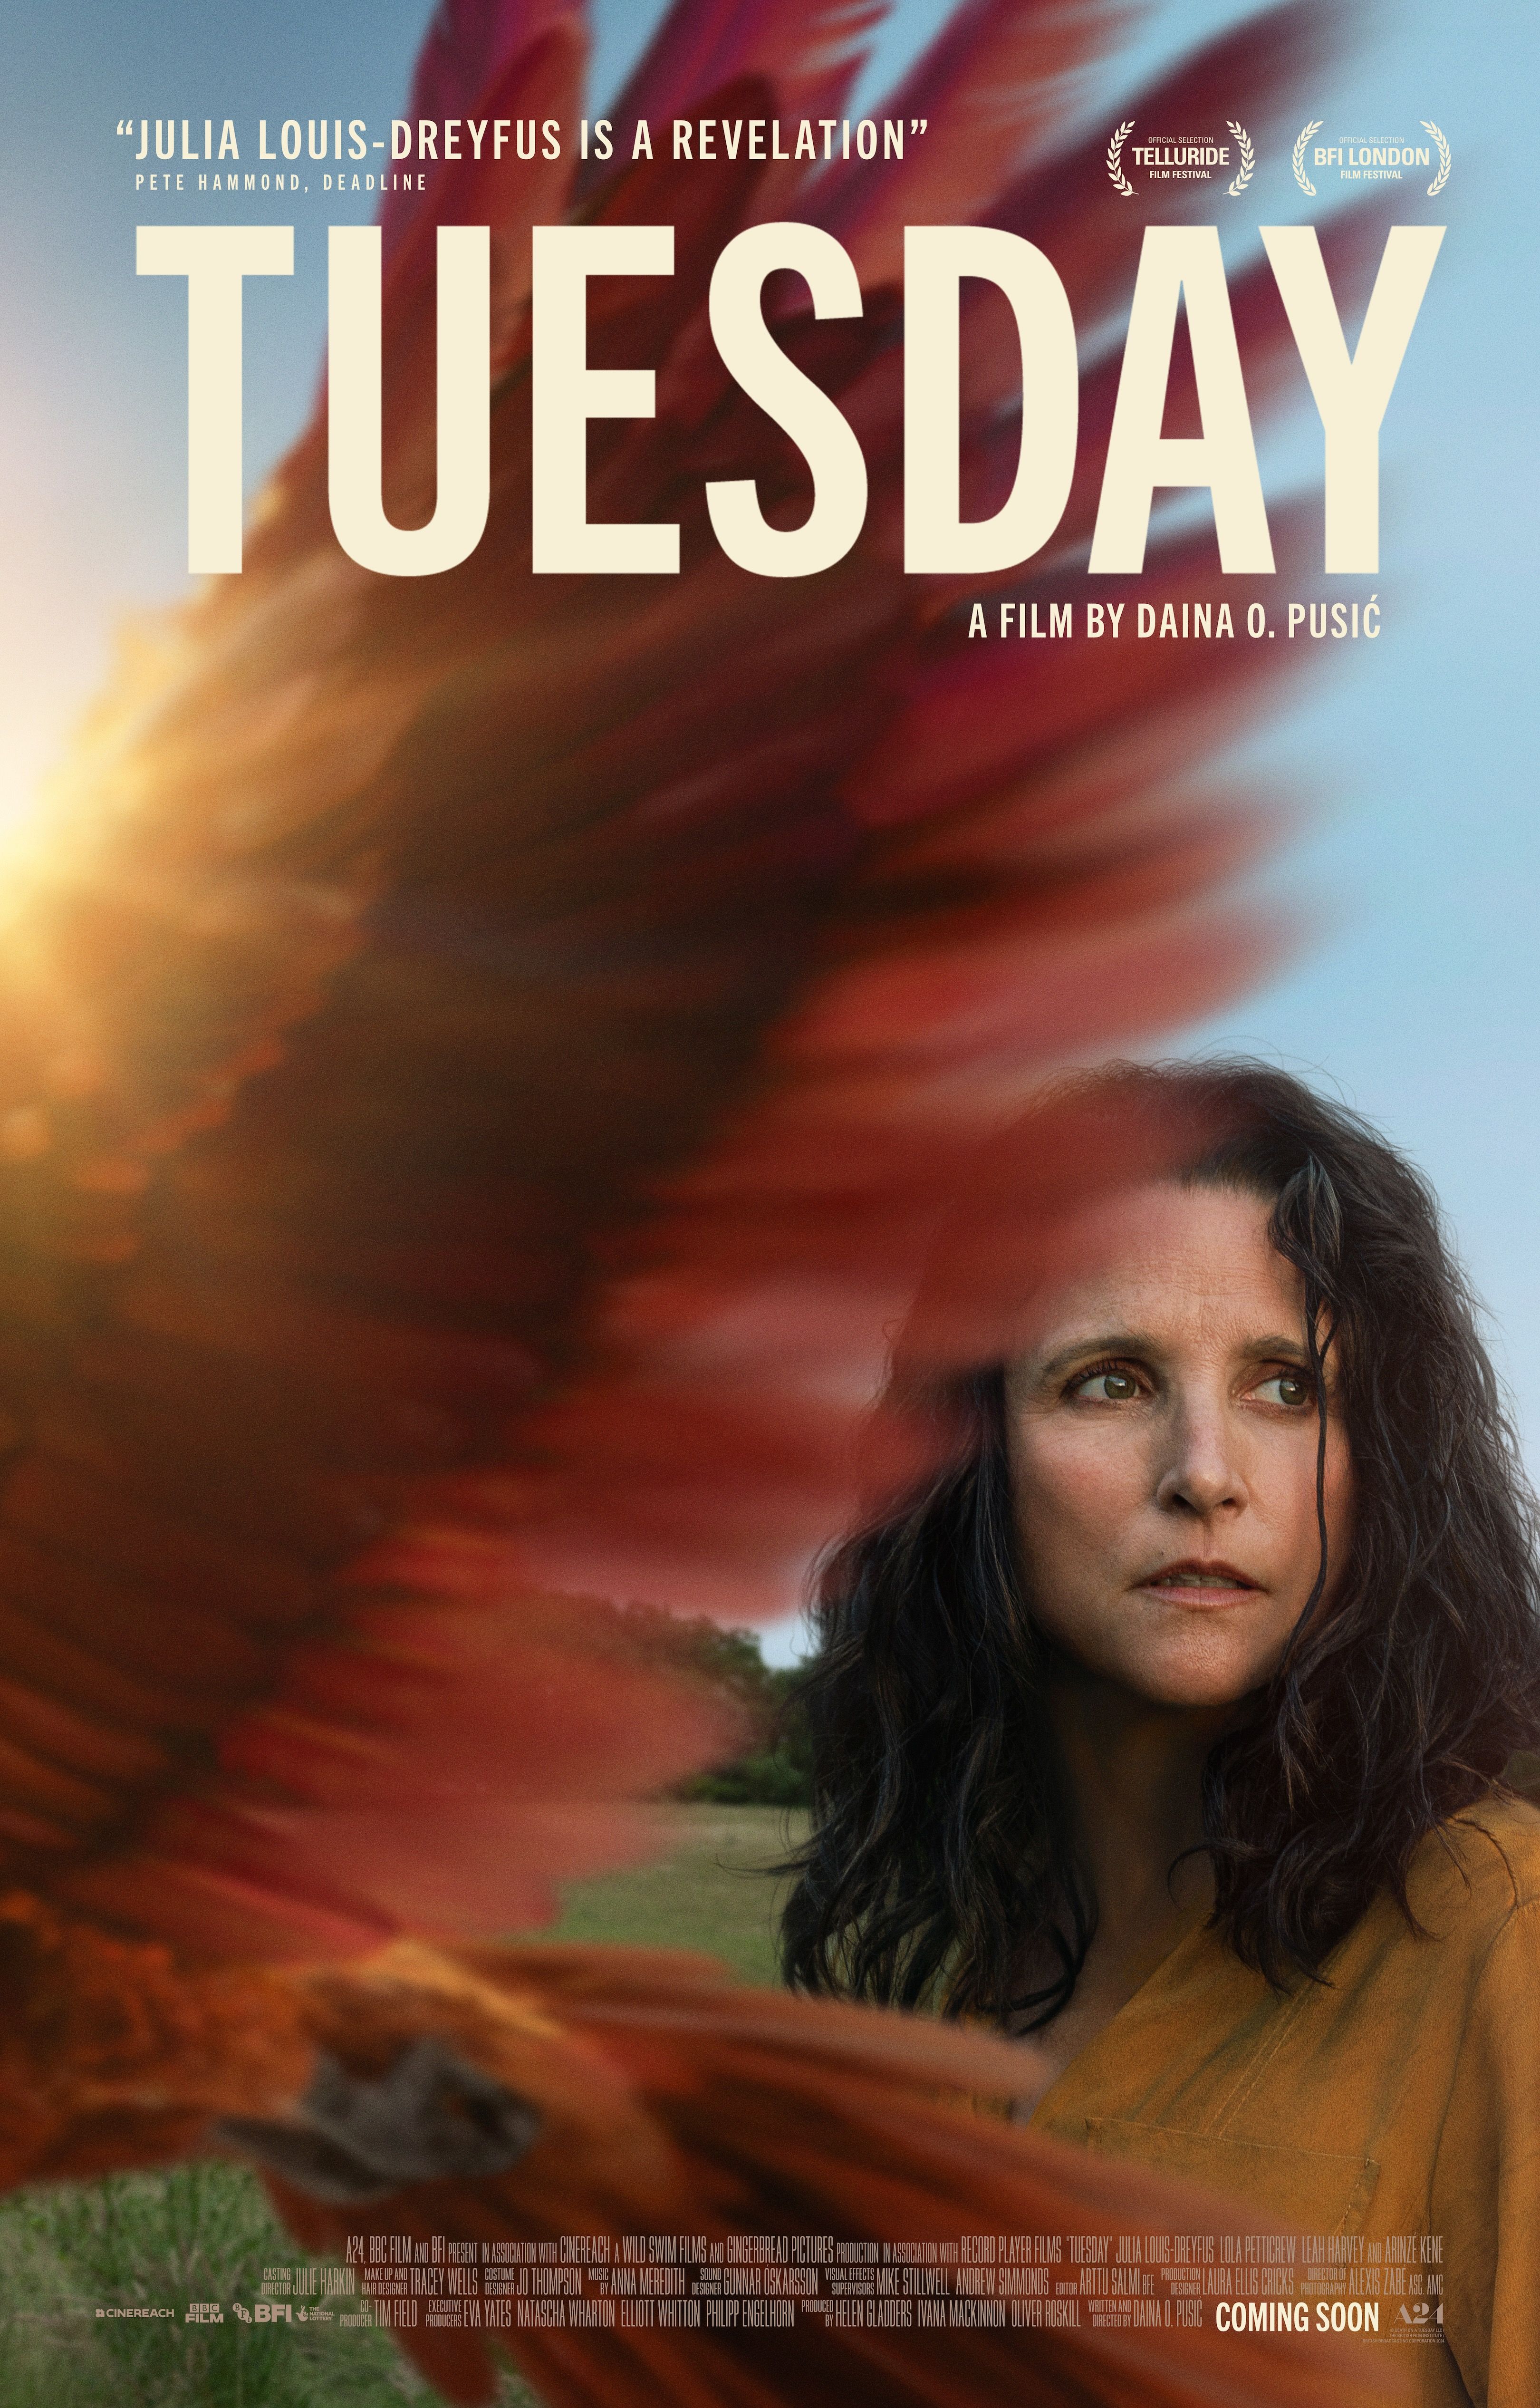 Julia Louis-Dreyfus on the poster for Tuesday